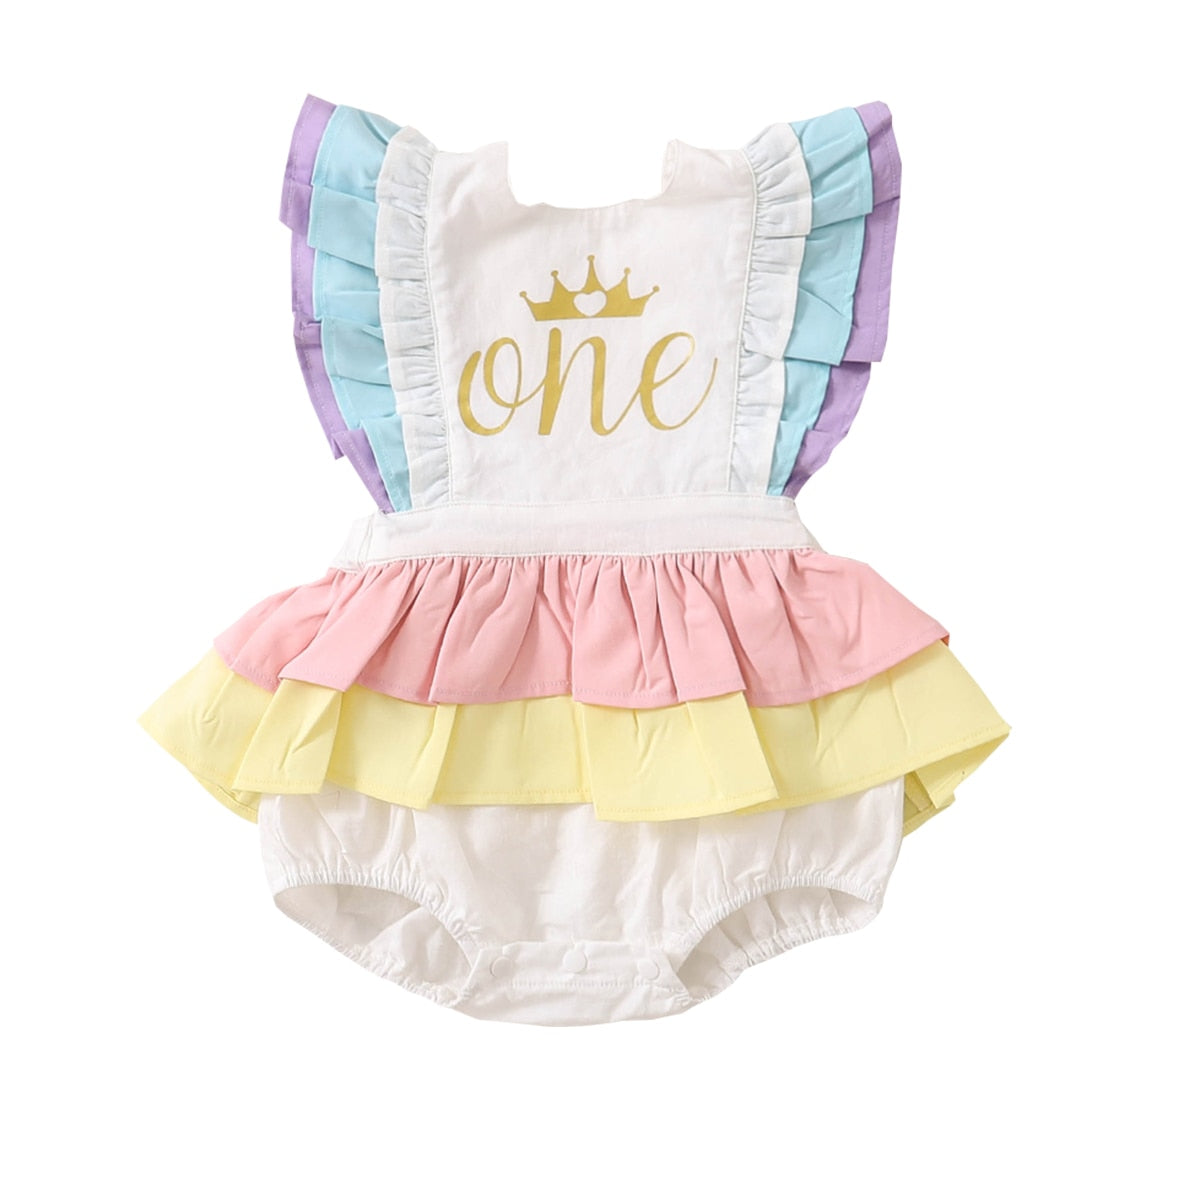 One pastel rainbow birthday outfit